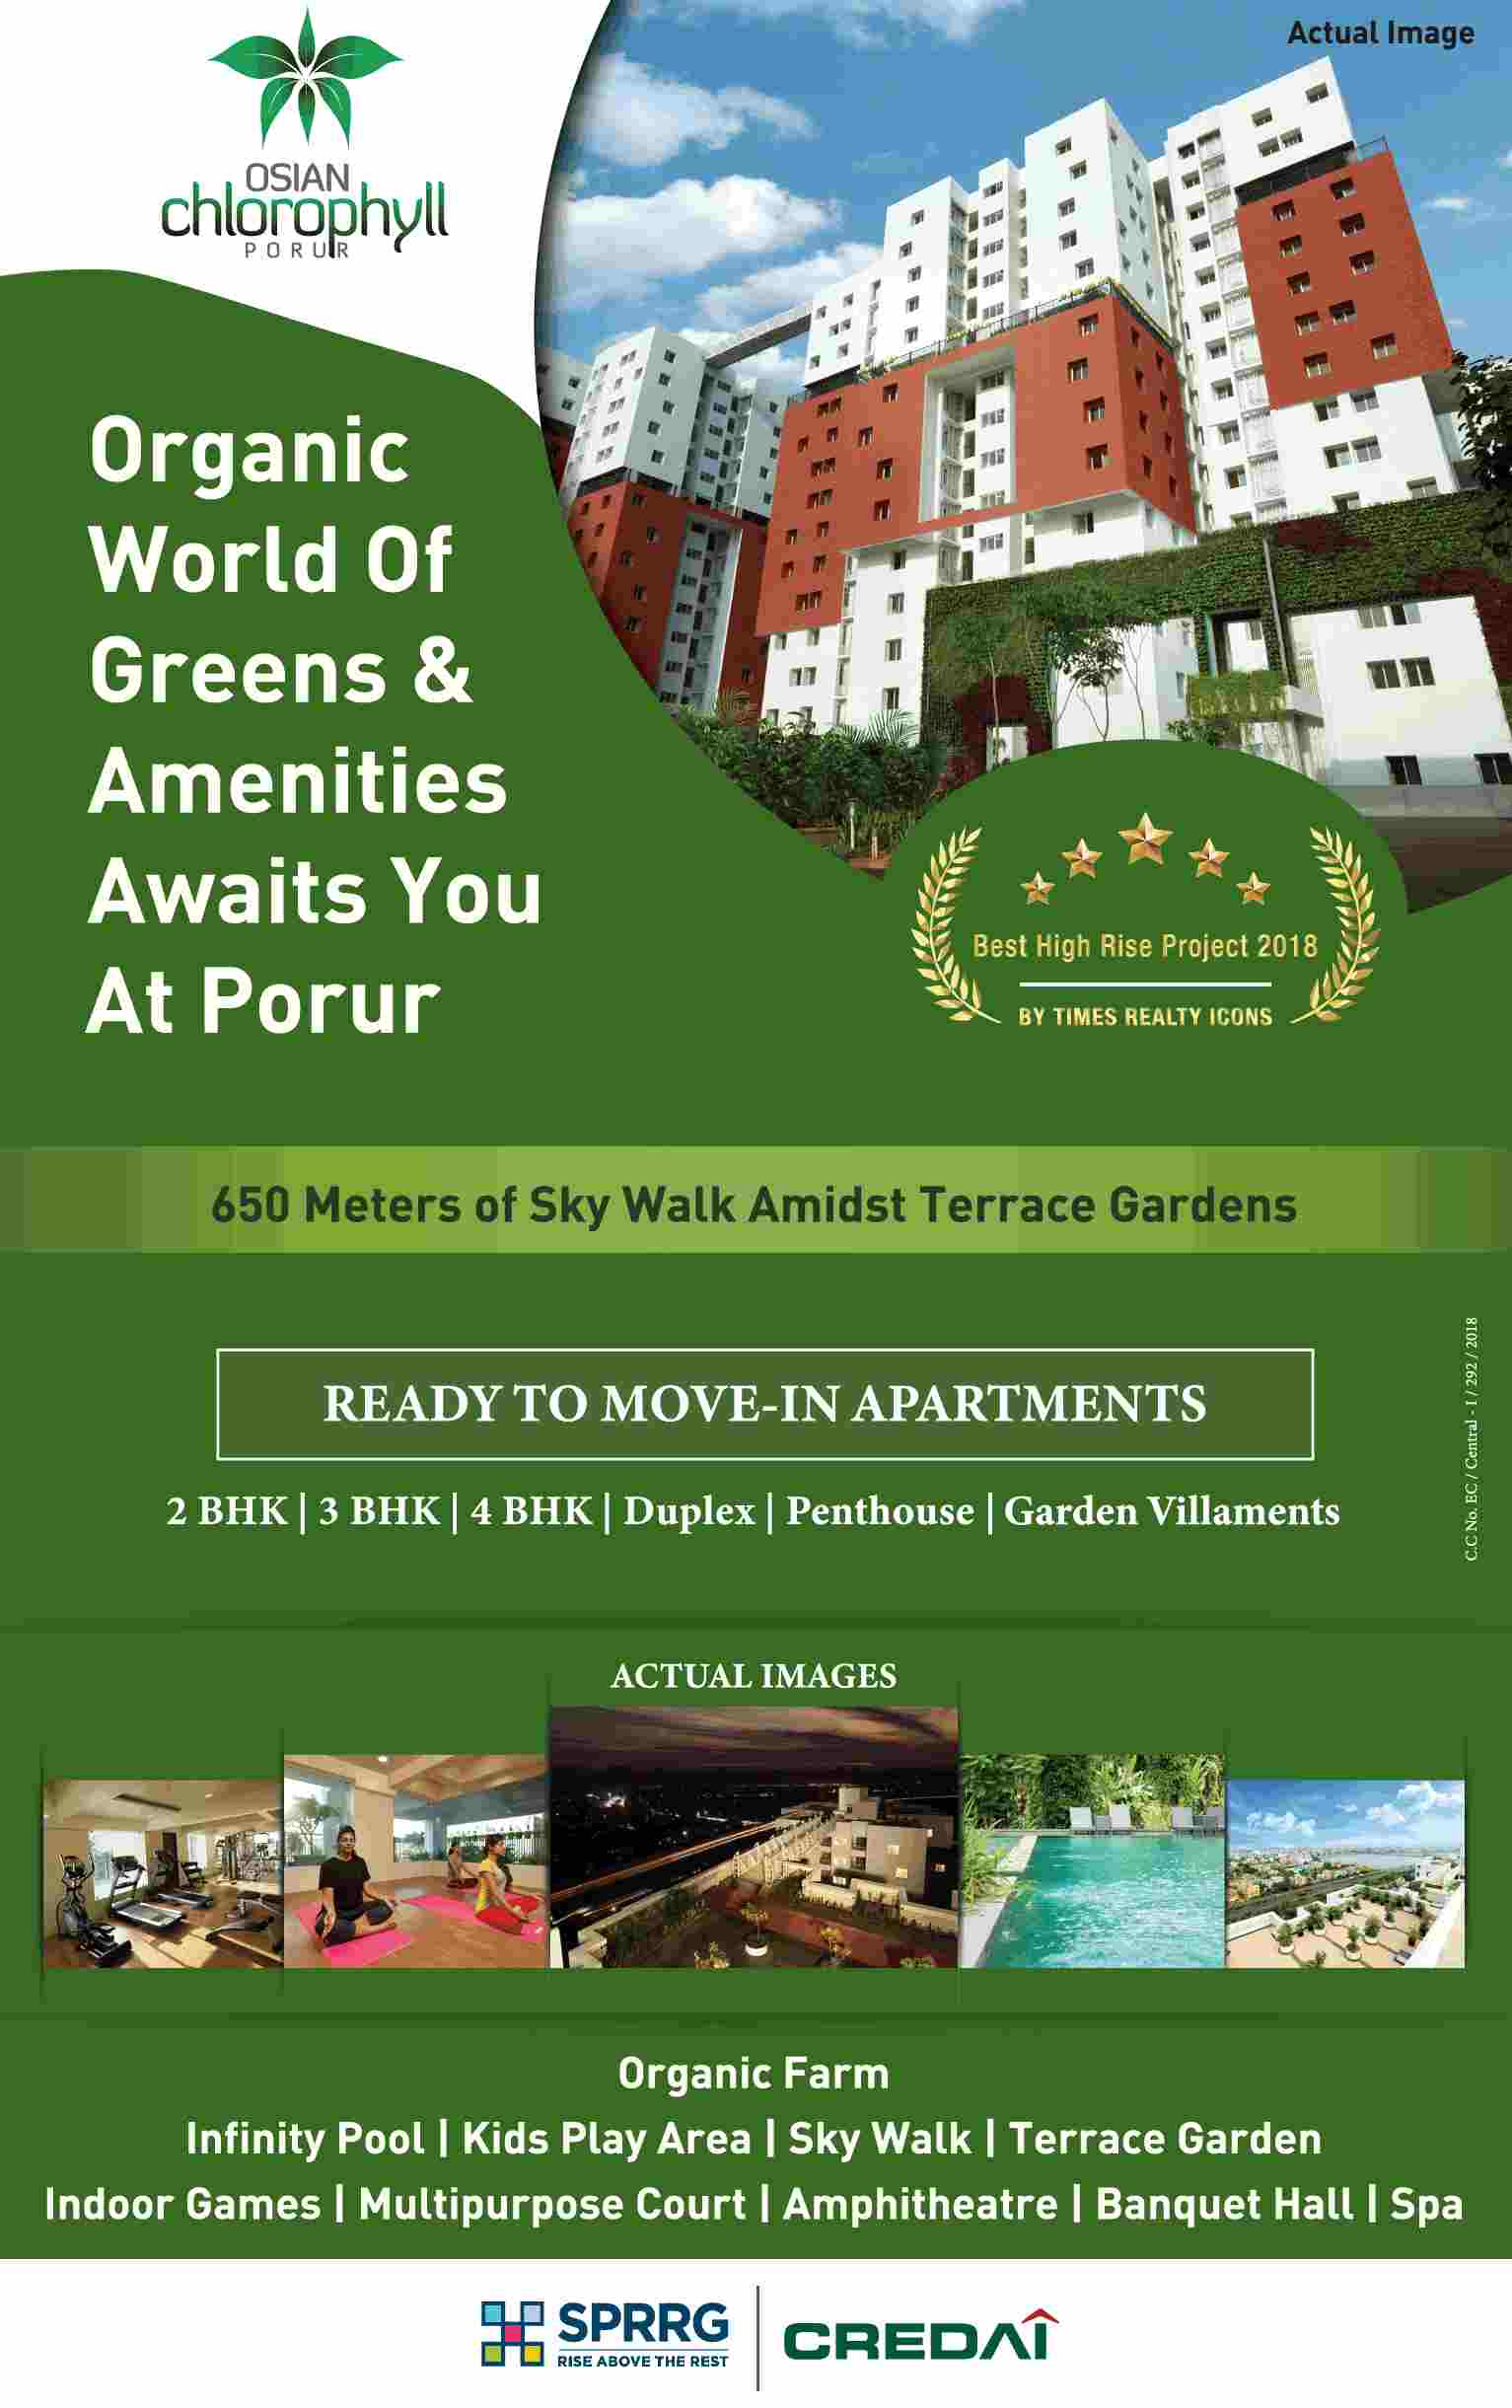 Book ready to move apartments & experience organic world of greens at SPR Osian Chlorophyll in Chennai